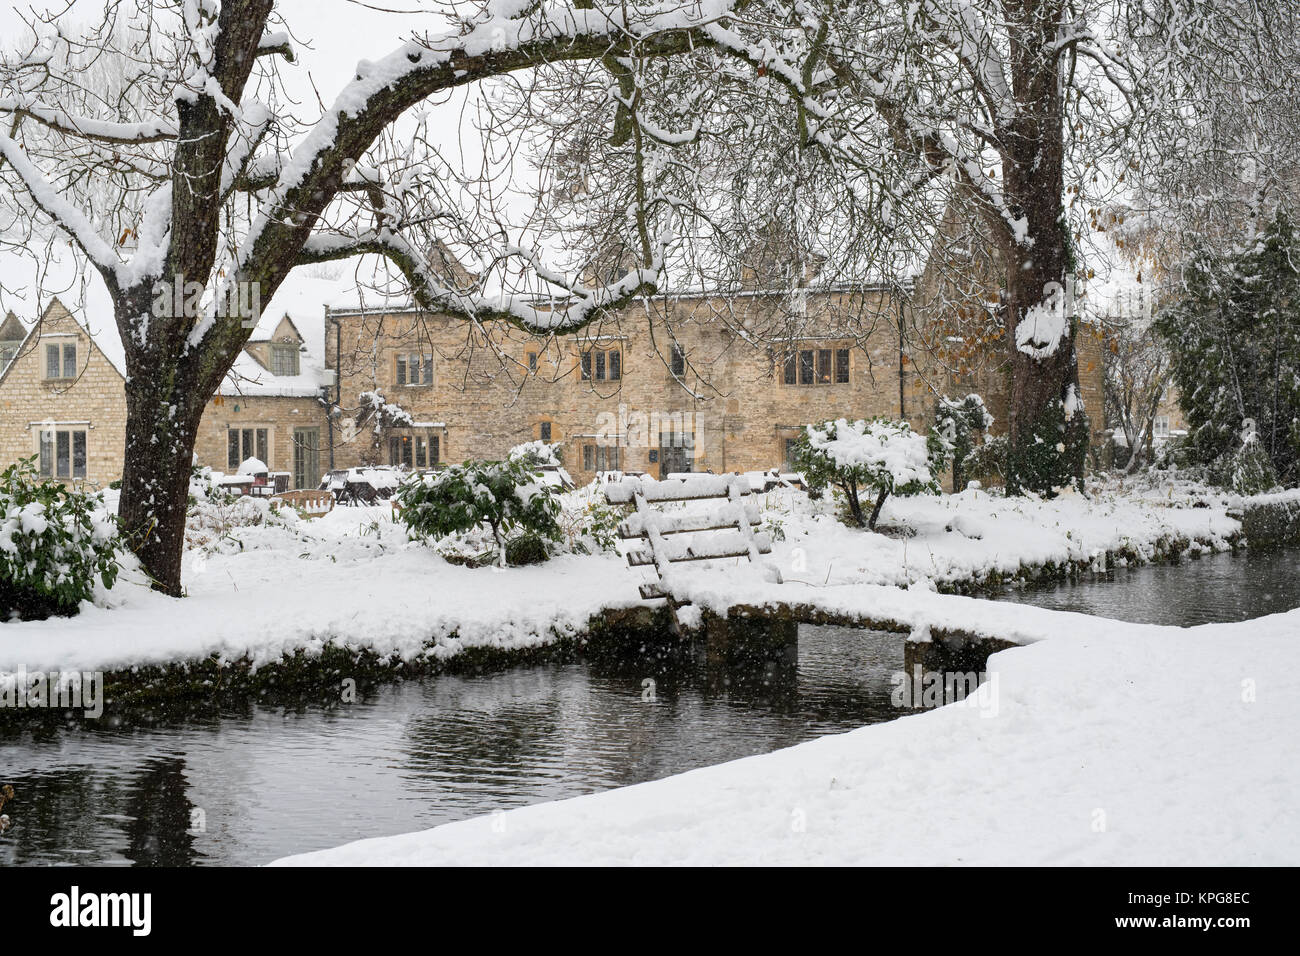 Le stragi Country inn mentre la sua neve in dicembre. Lower Slaughter, Cotswolds, Gloucestershire, Inghilterra Foto Stock